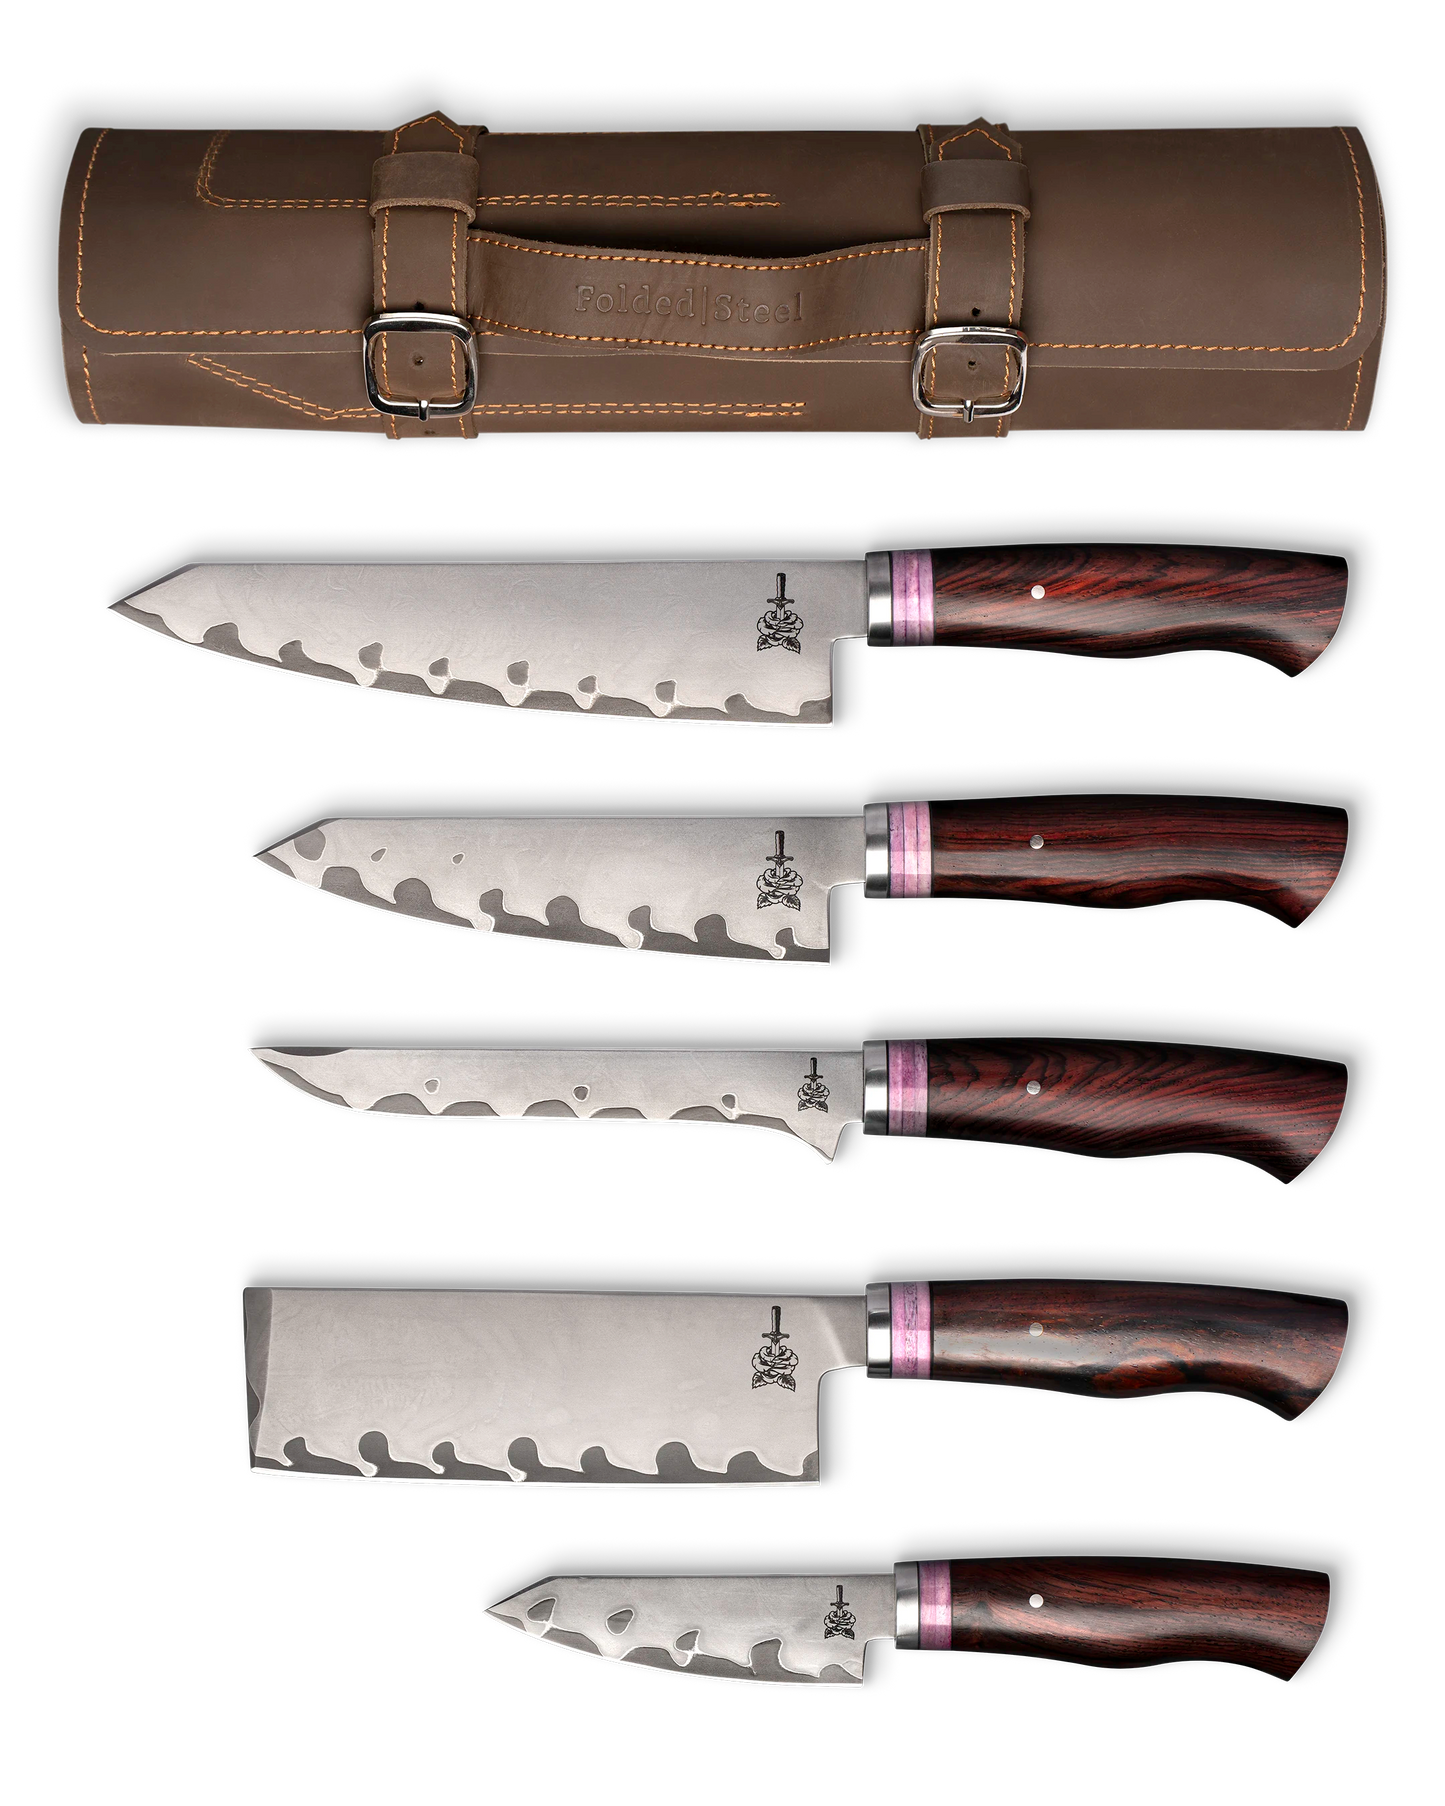 folded steel wolf's bane 5-piece san mai knife set with leather roll